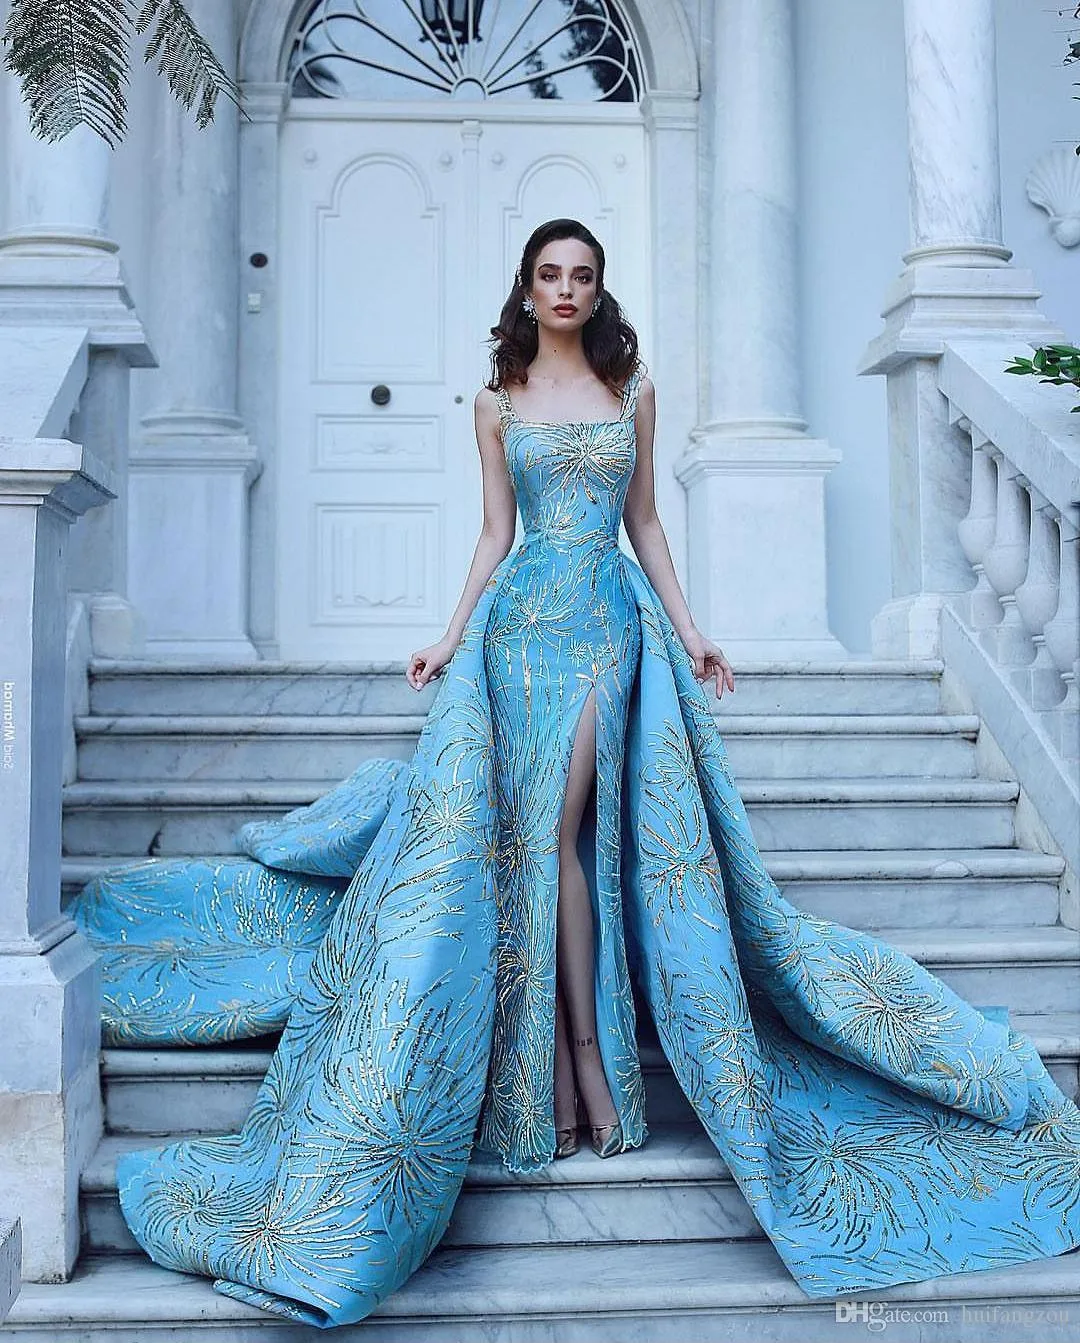 Sky Blue Gown dress | Party wear gown, Bollywood style dress, Gown party  wear